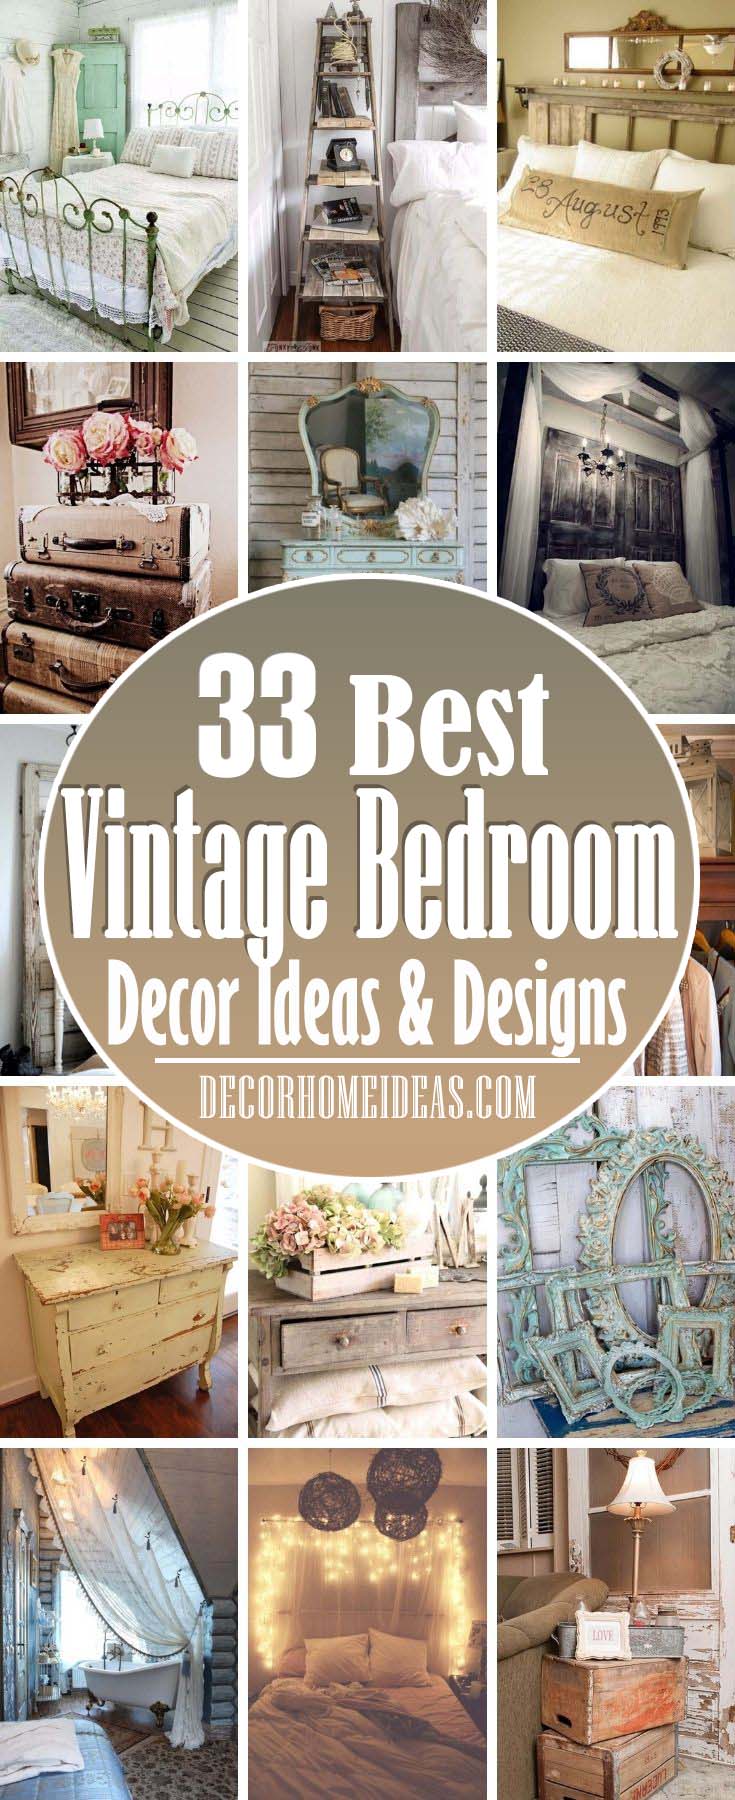 20 Sweet Vintage Bedroom Décor Ideas To Get Inspired   Decor Home ...